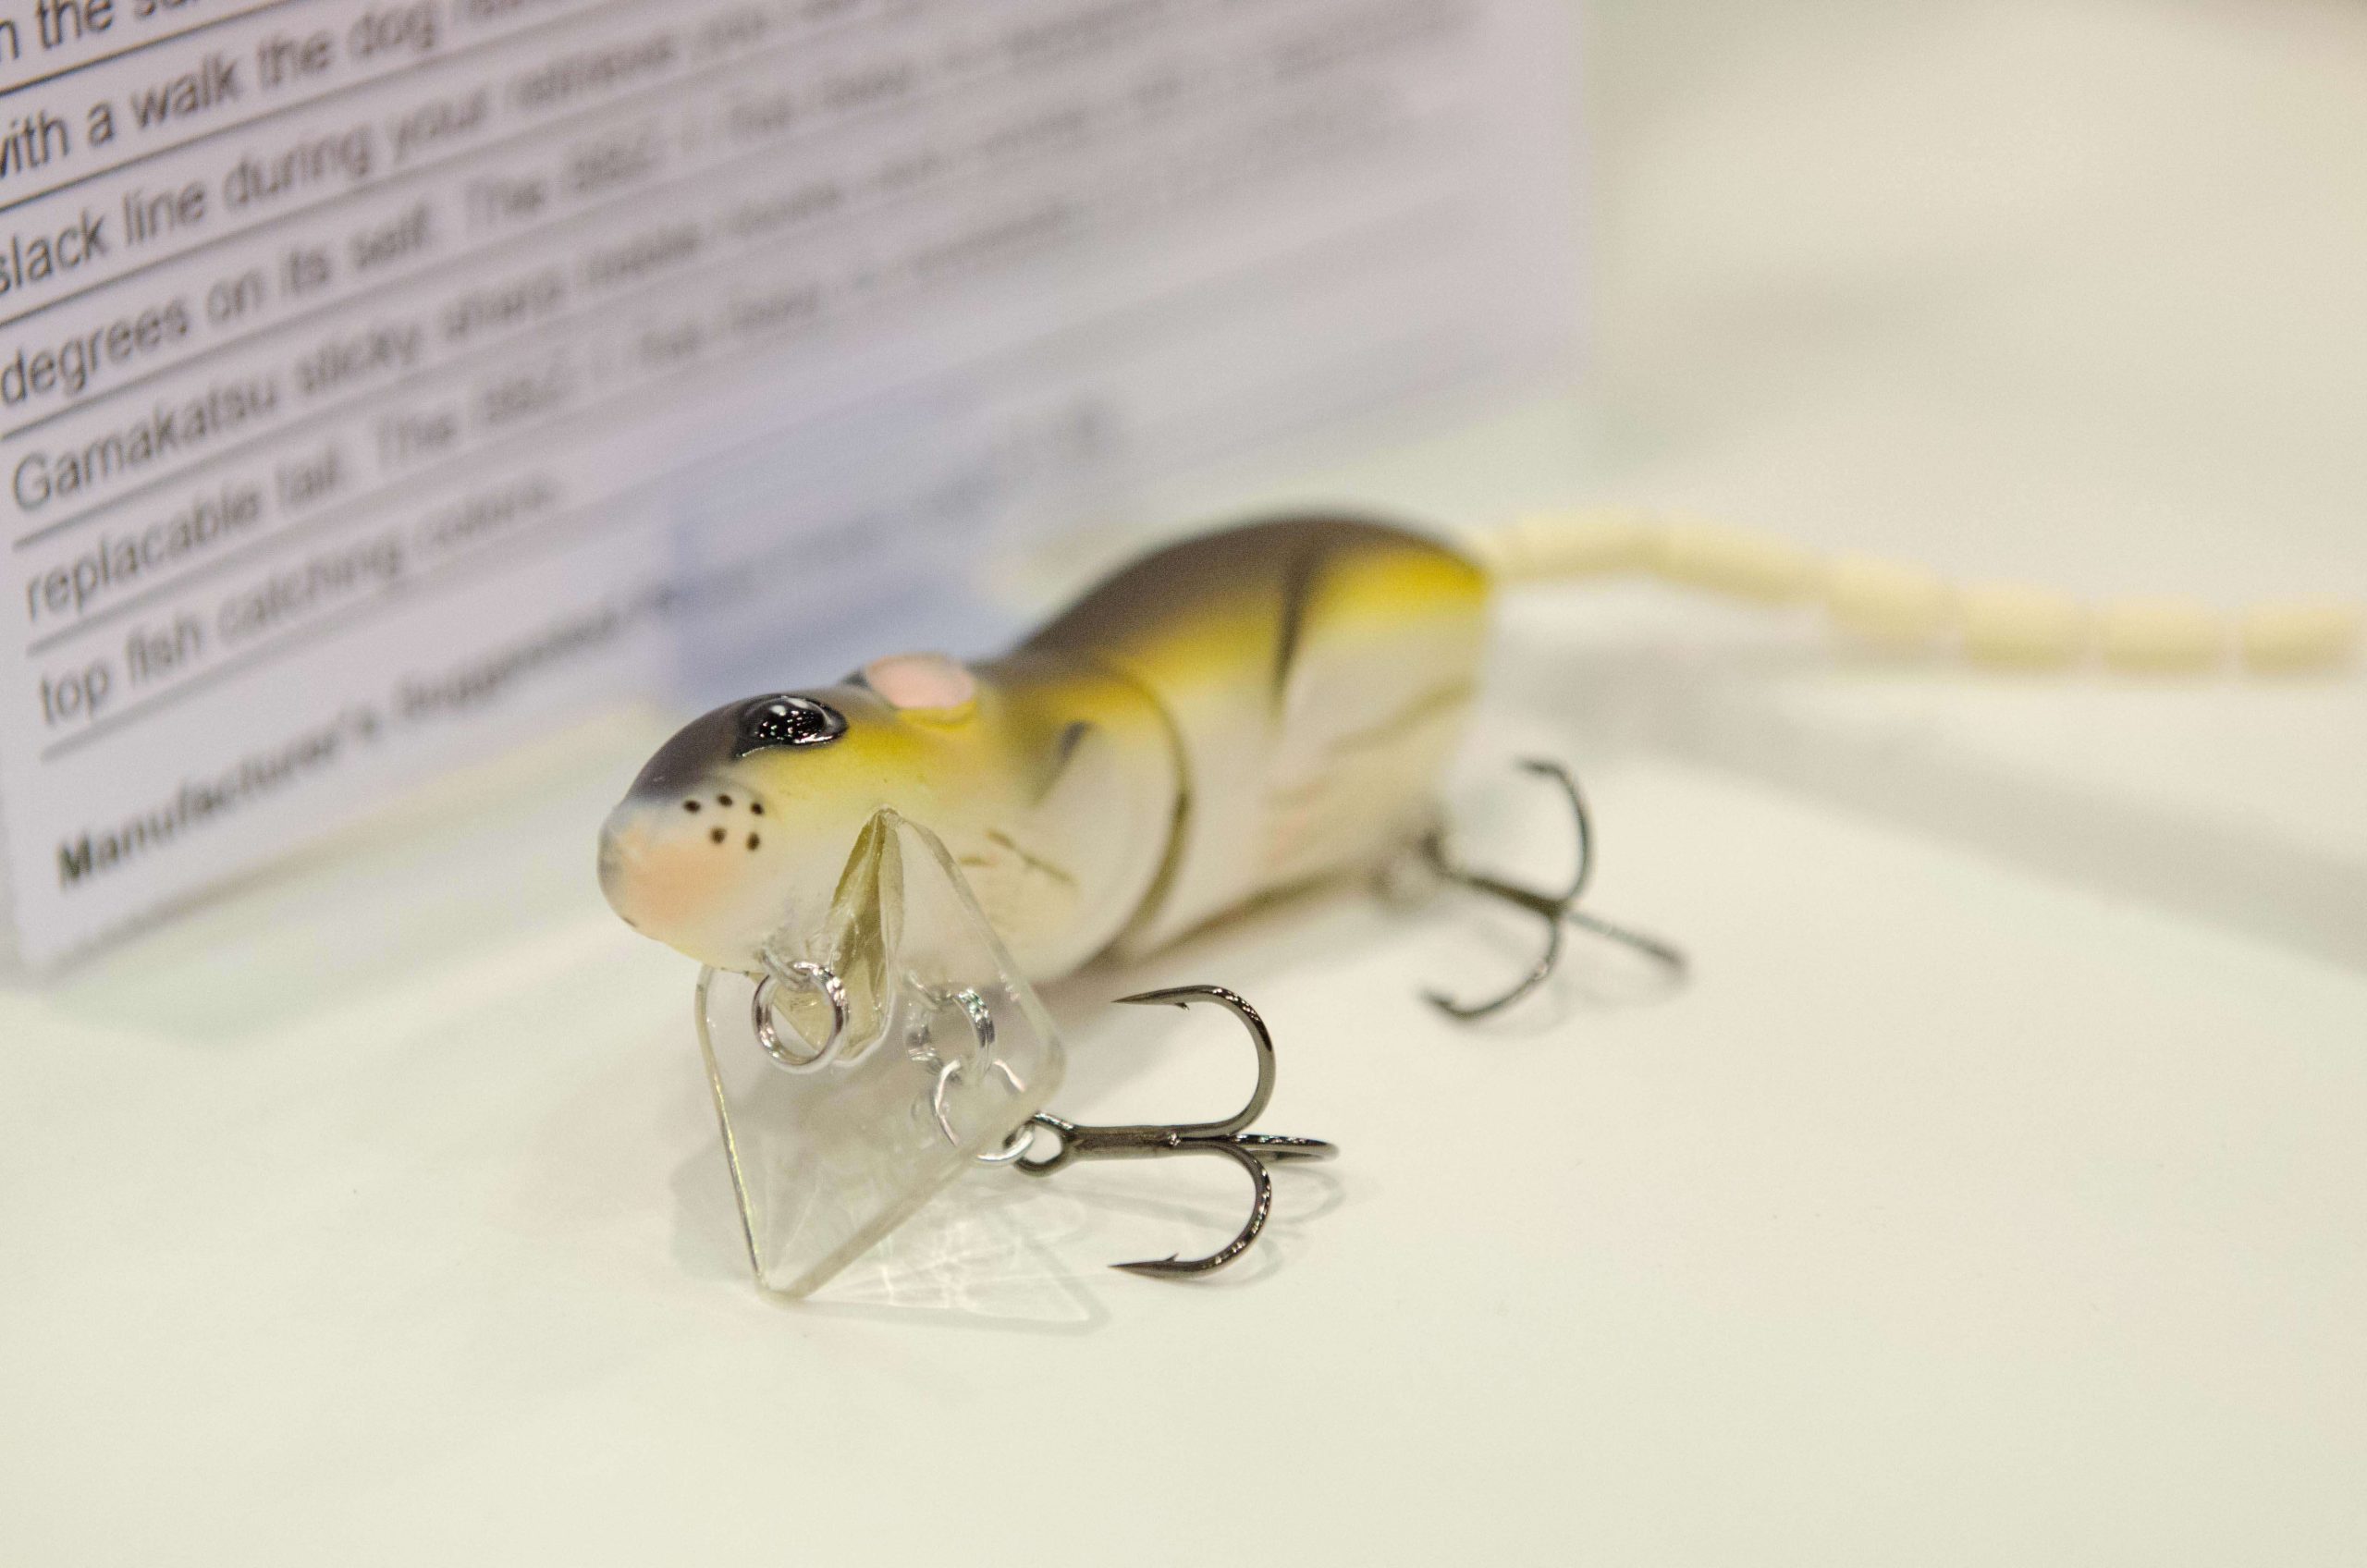 The BBZ-1 Rat Baby is a hard lure that is 3 1/2 inches long and is equipped with two treble hooks. 